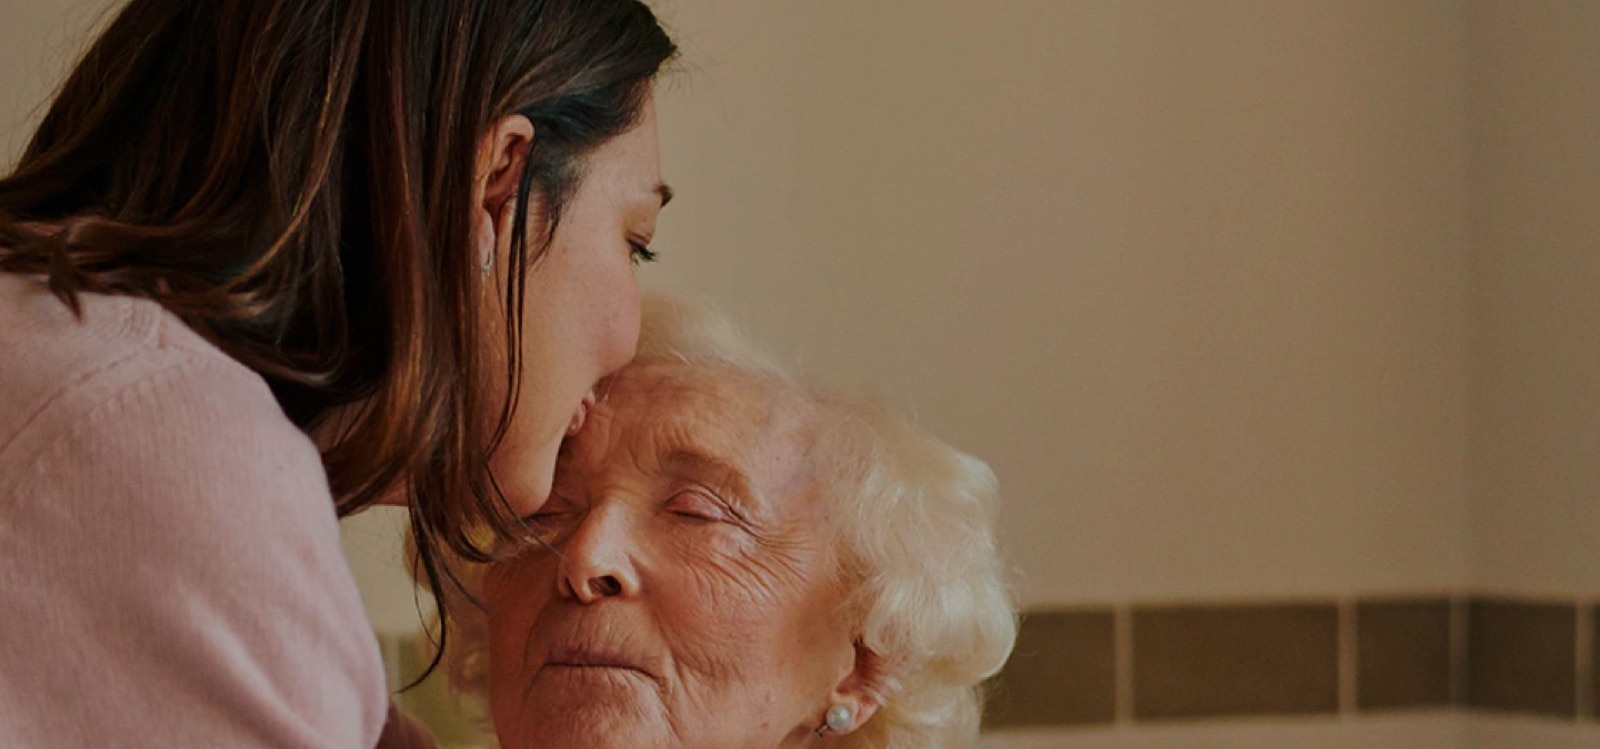 Younger woman kissing an older woman on the forehead